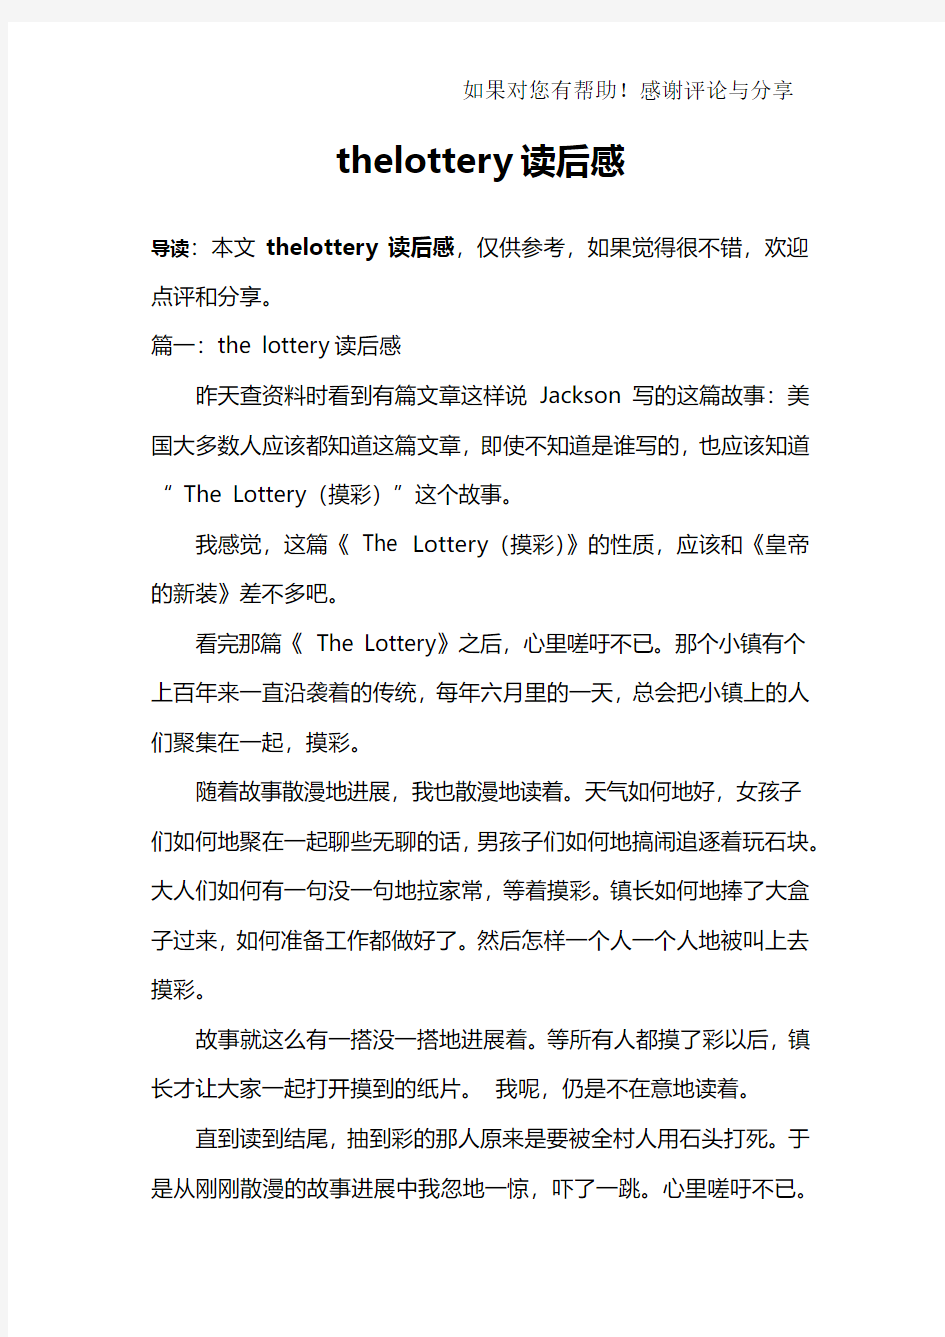 thelottery读后感